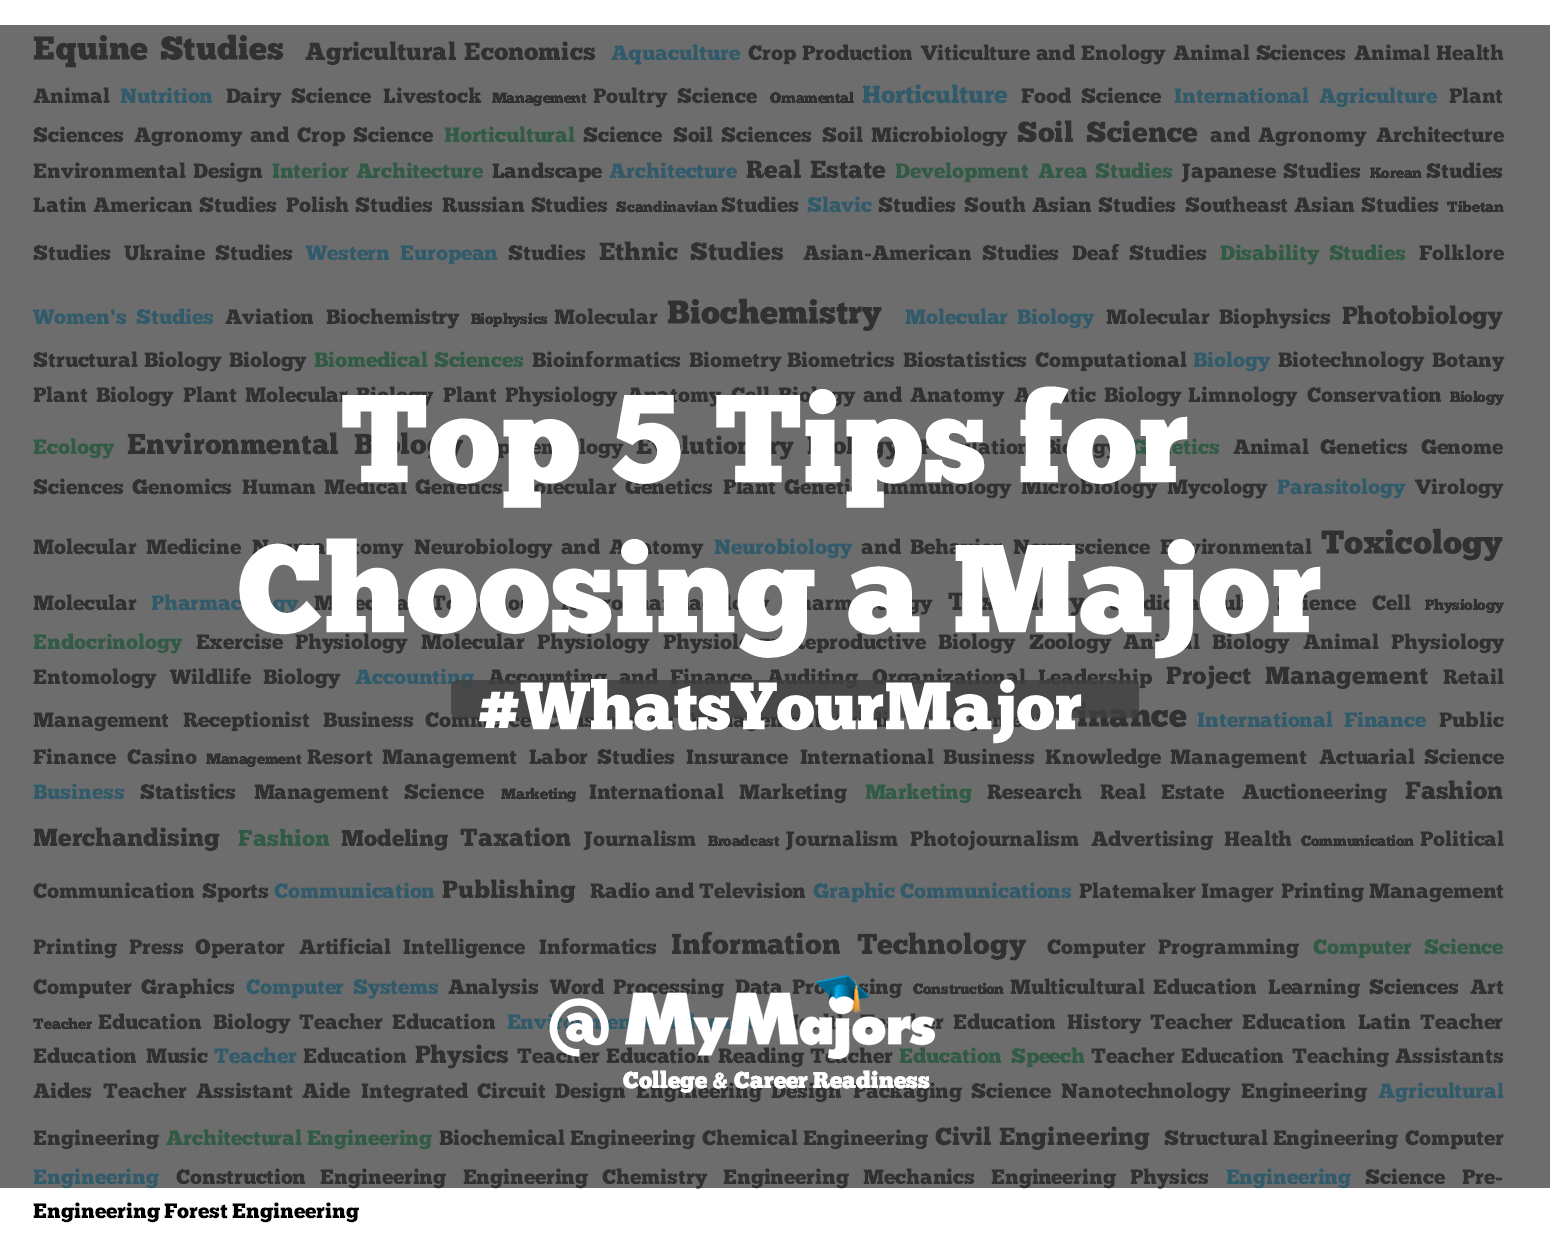 Top 5 Tips to Find a Major